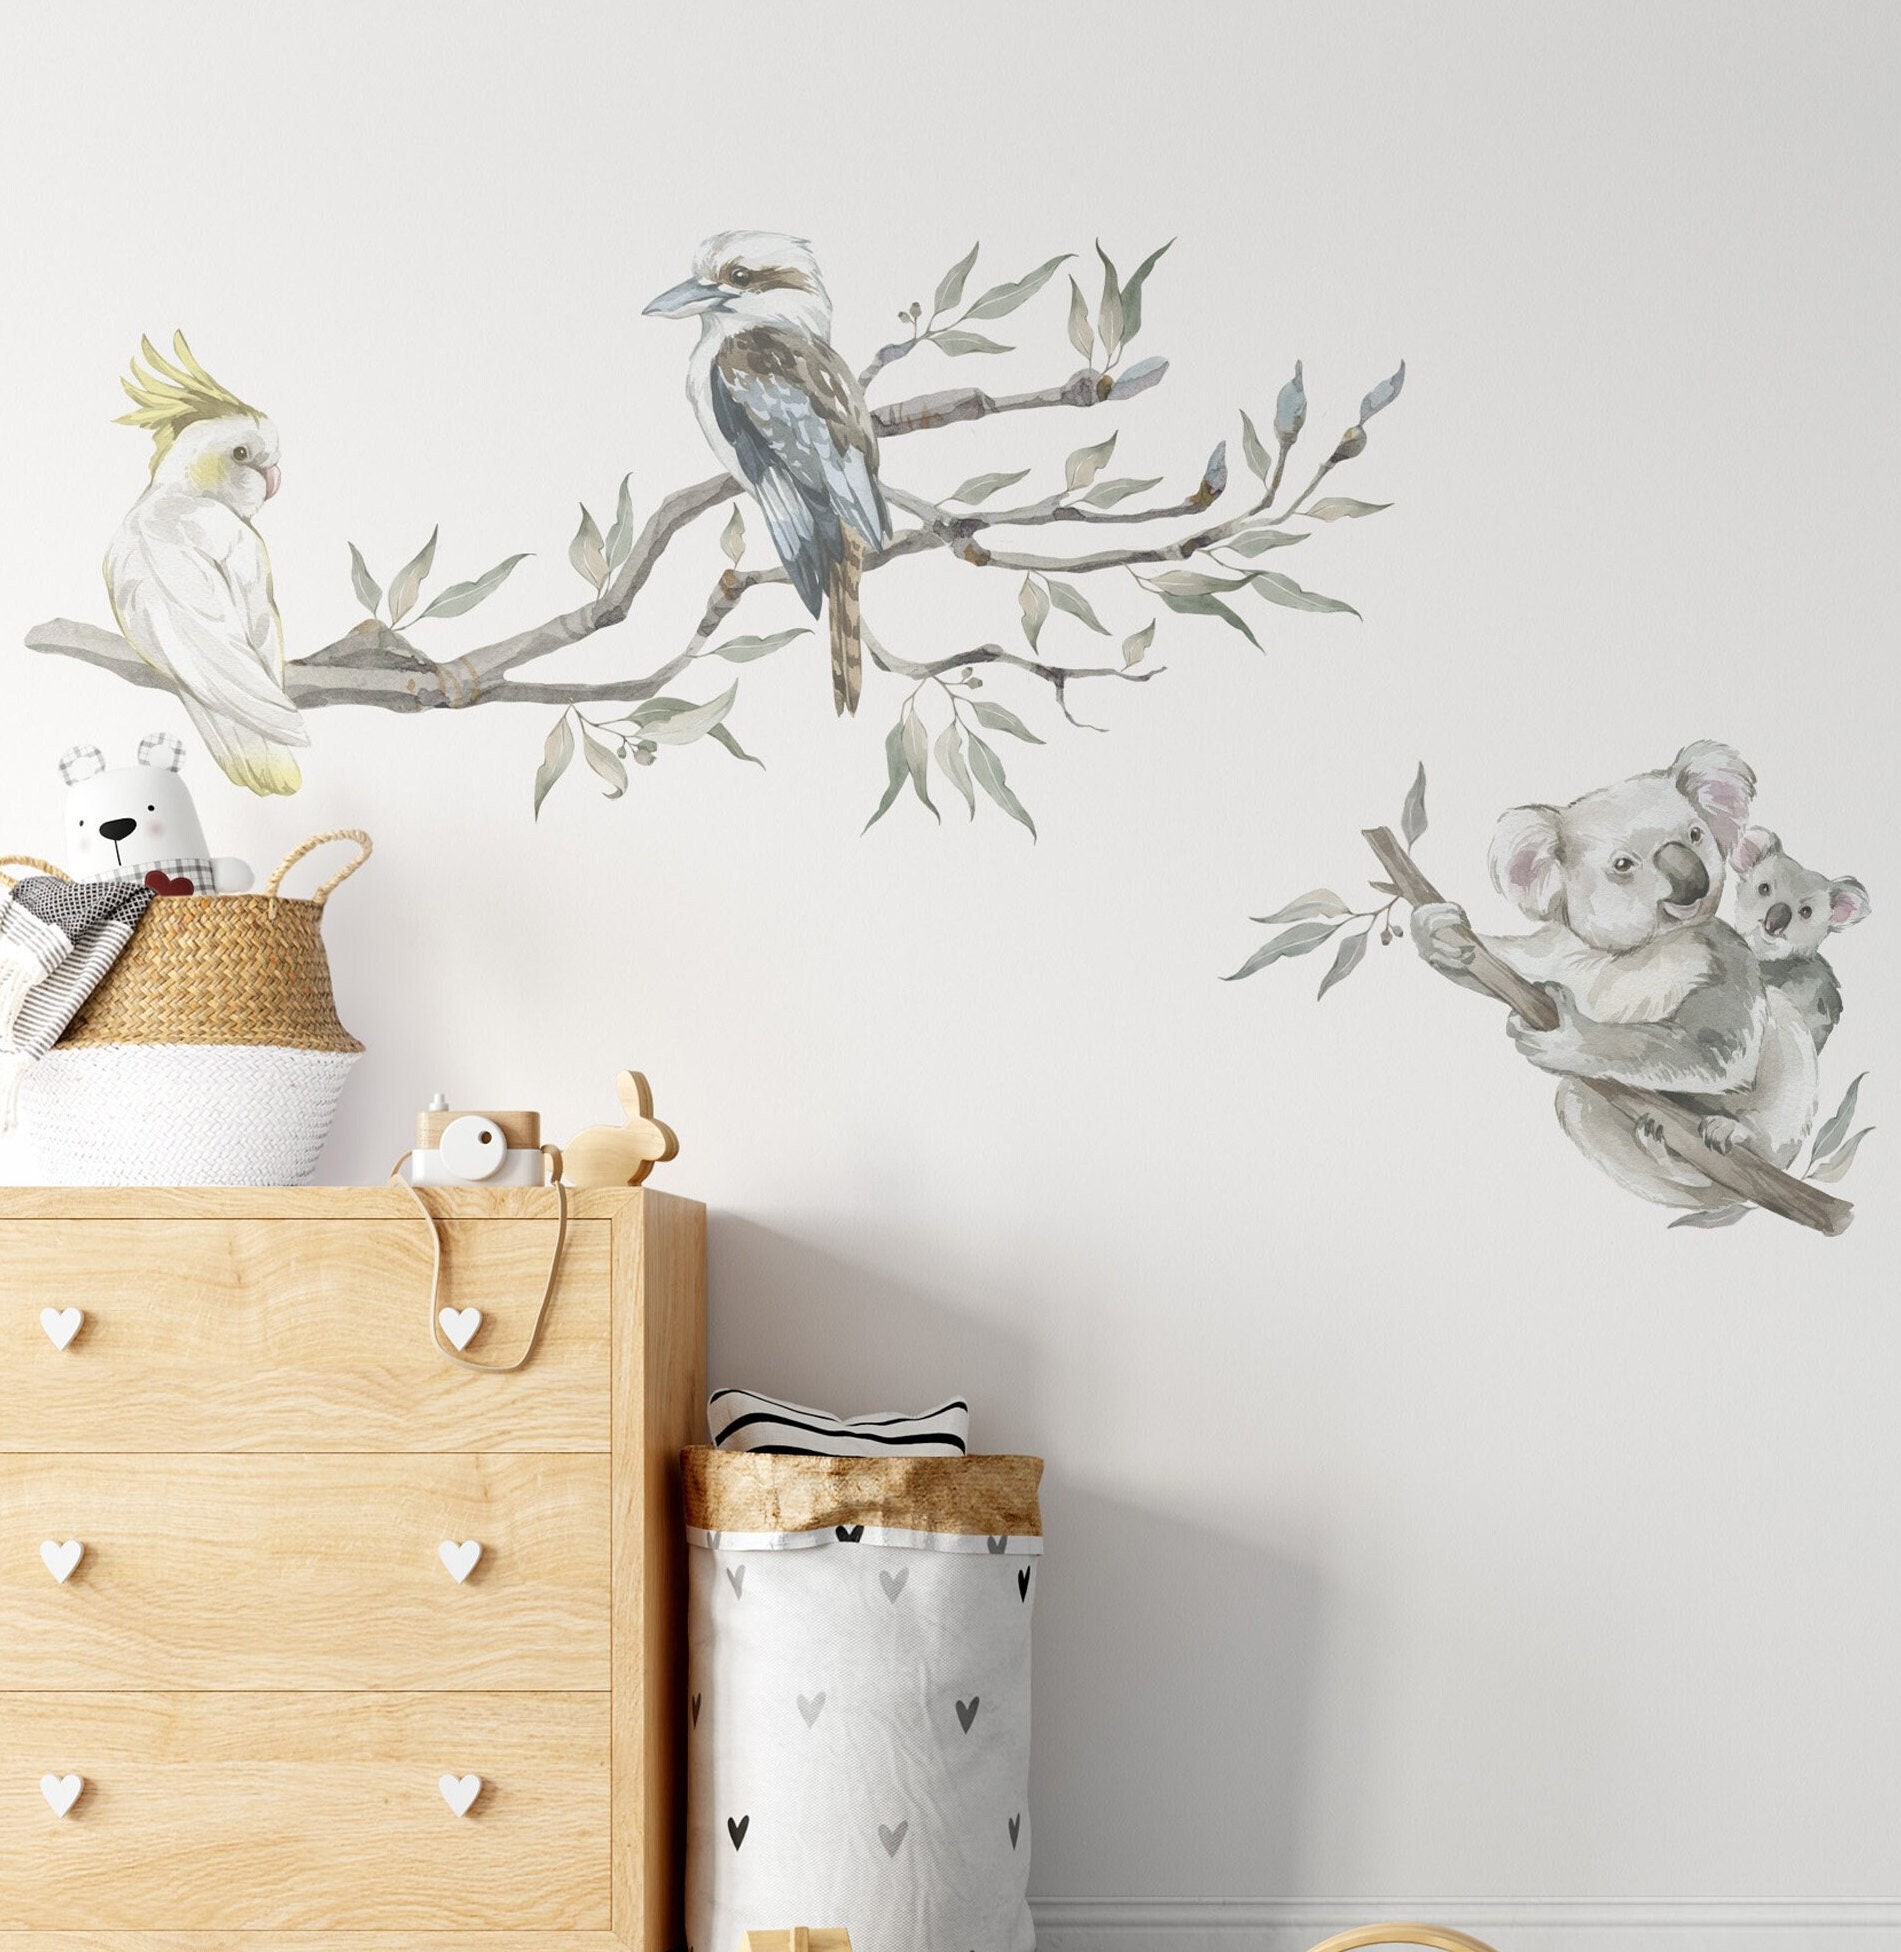 Vinyl Wall Decals Tree Wall Decal for Nursery-corner Top Tree Branch-white  Tree Decals Wall Mural Large Decal DK268 